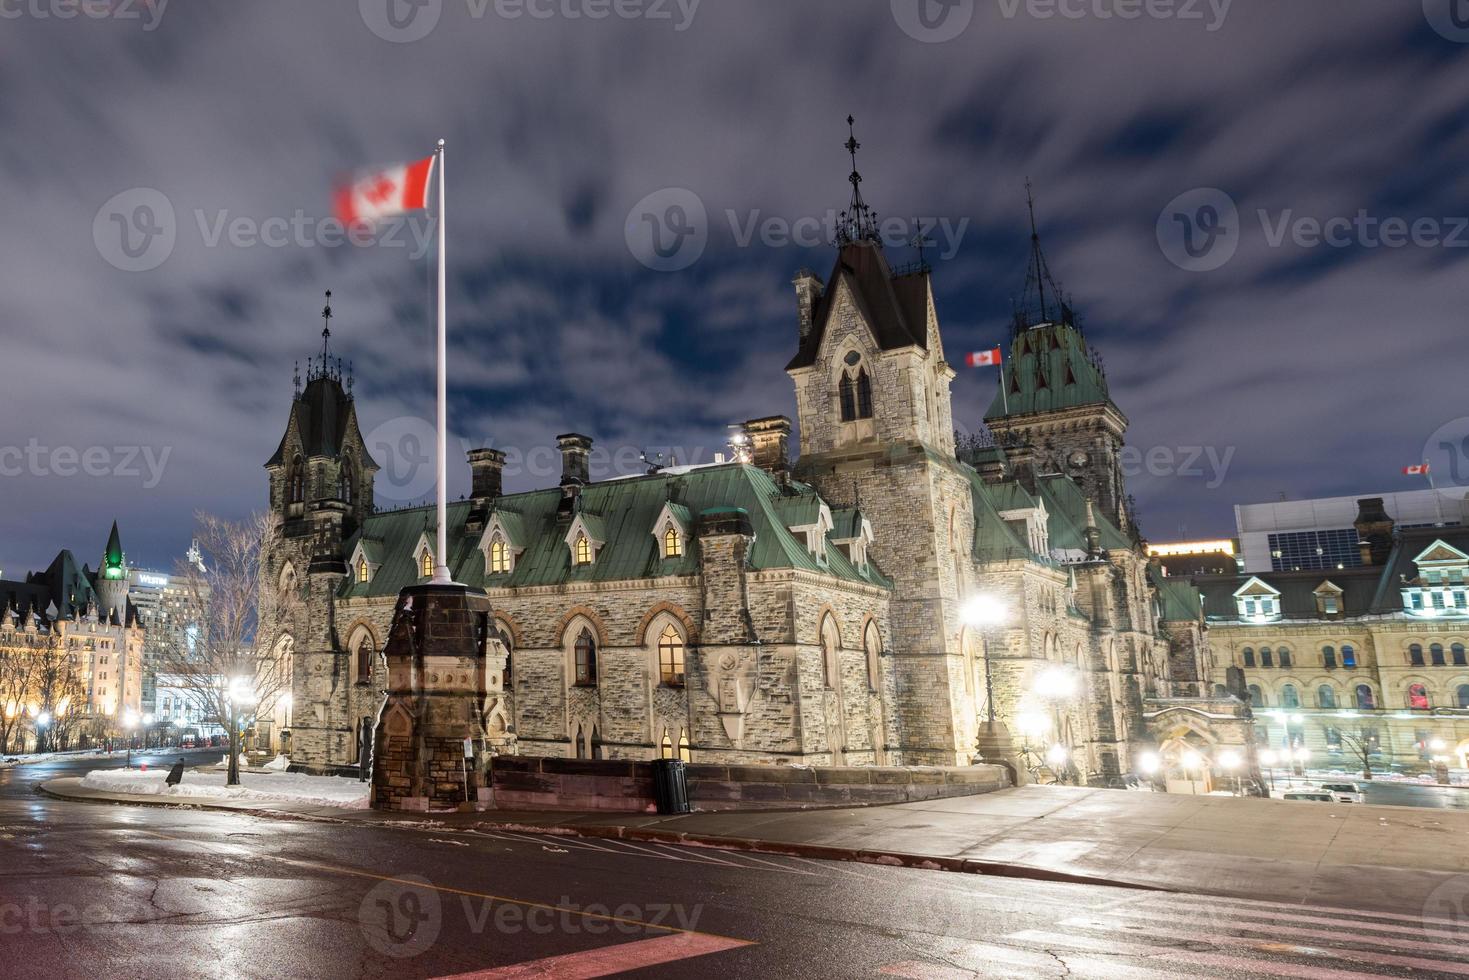 Parliament Hill and the Canadian House of Parliament in Ottawa, Canada during wintertime at night. photo